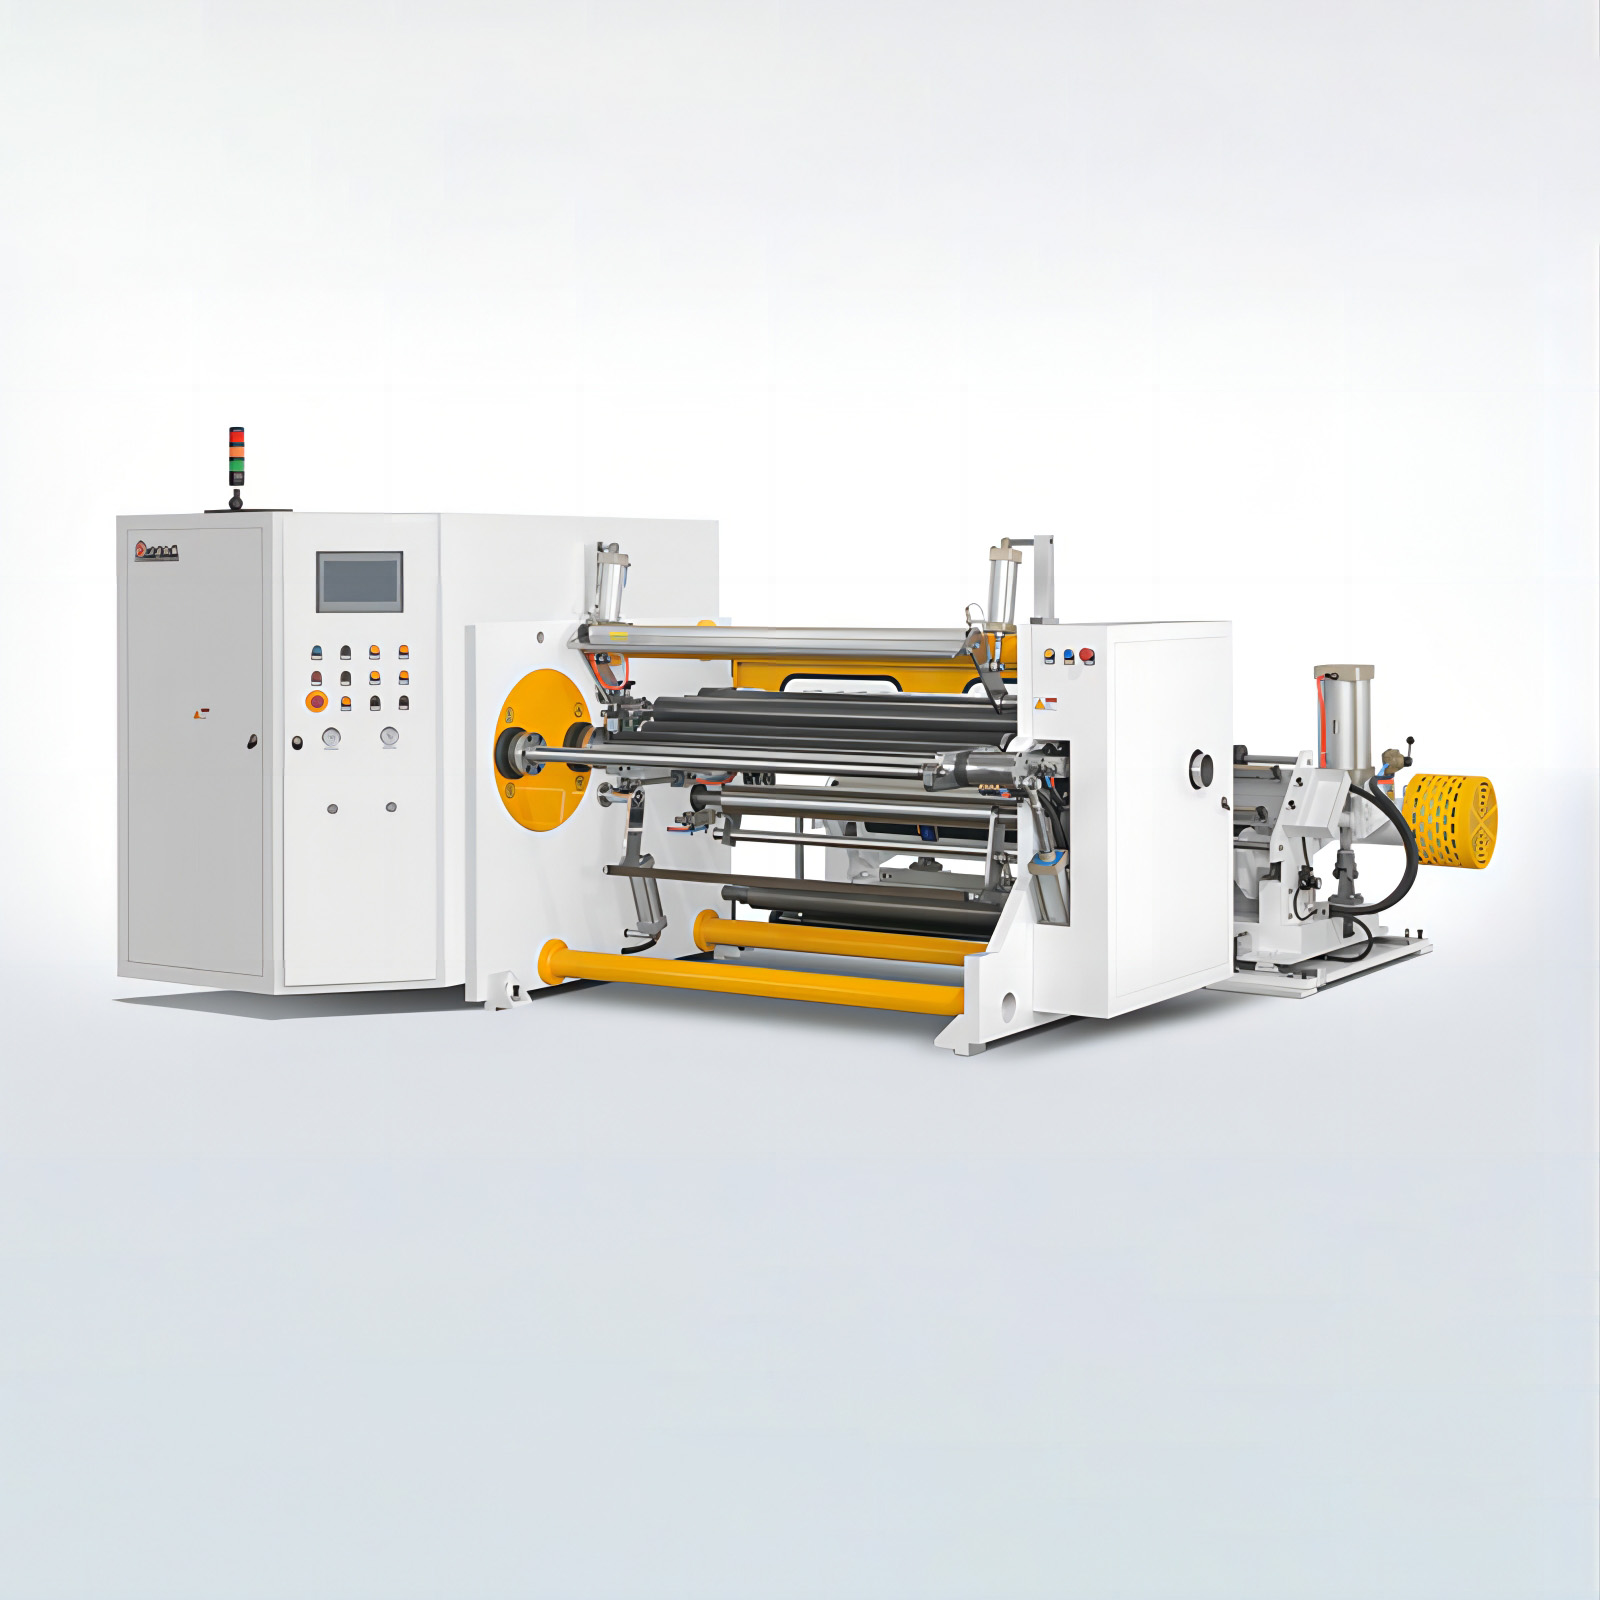 High-Quality Slitting and Rewinding Equipment for Efficient Production